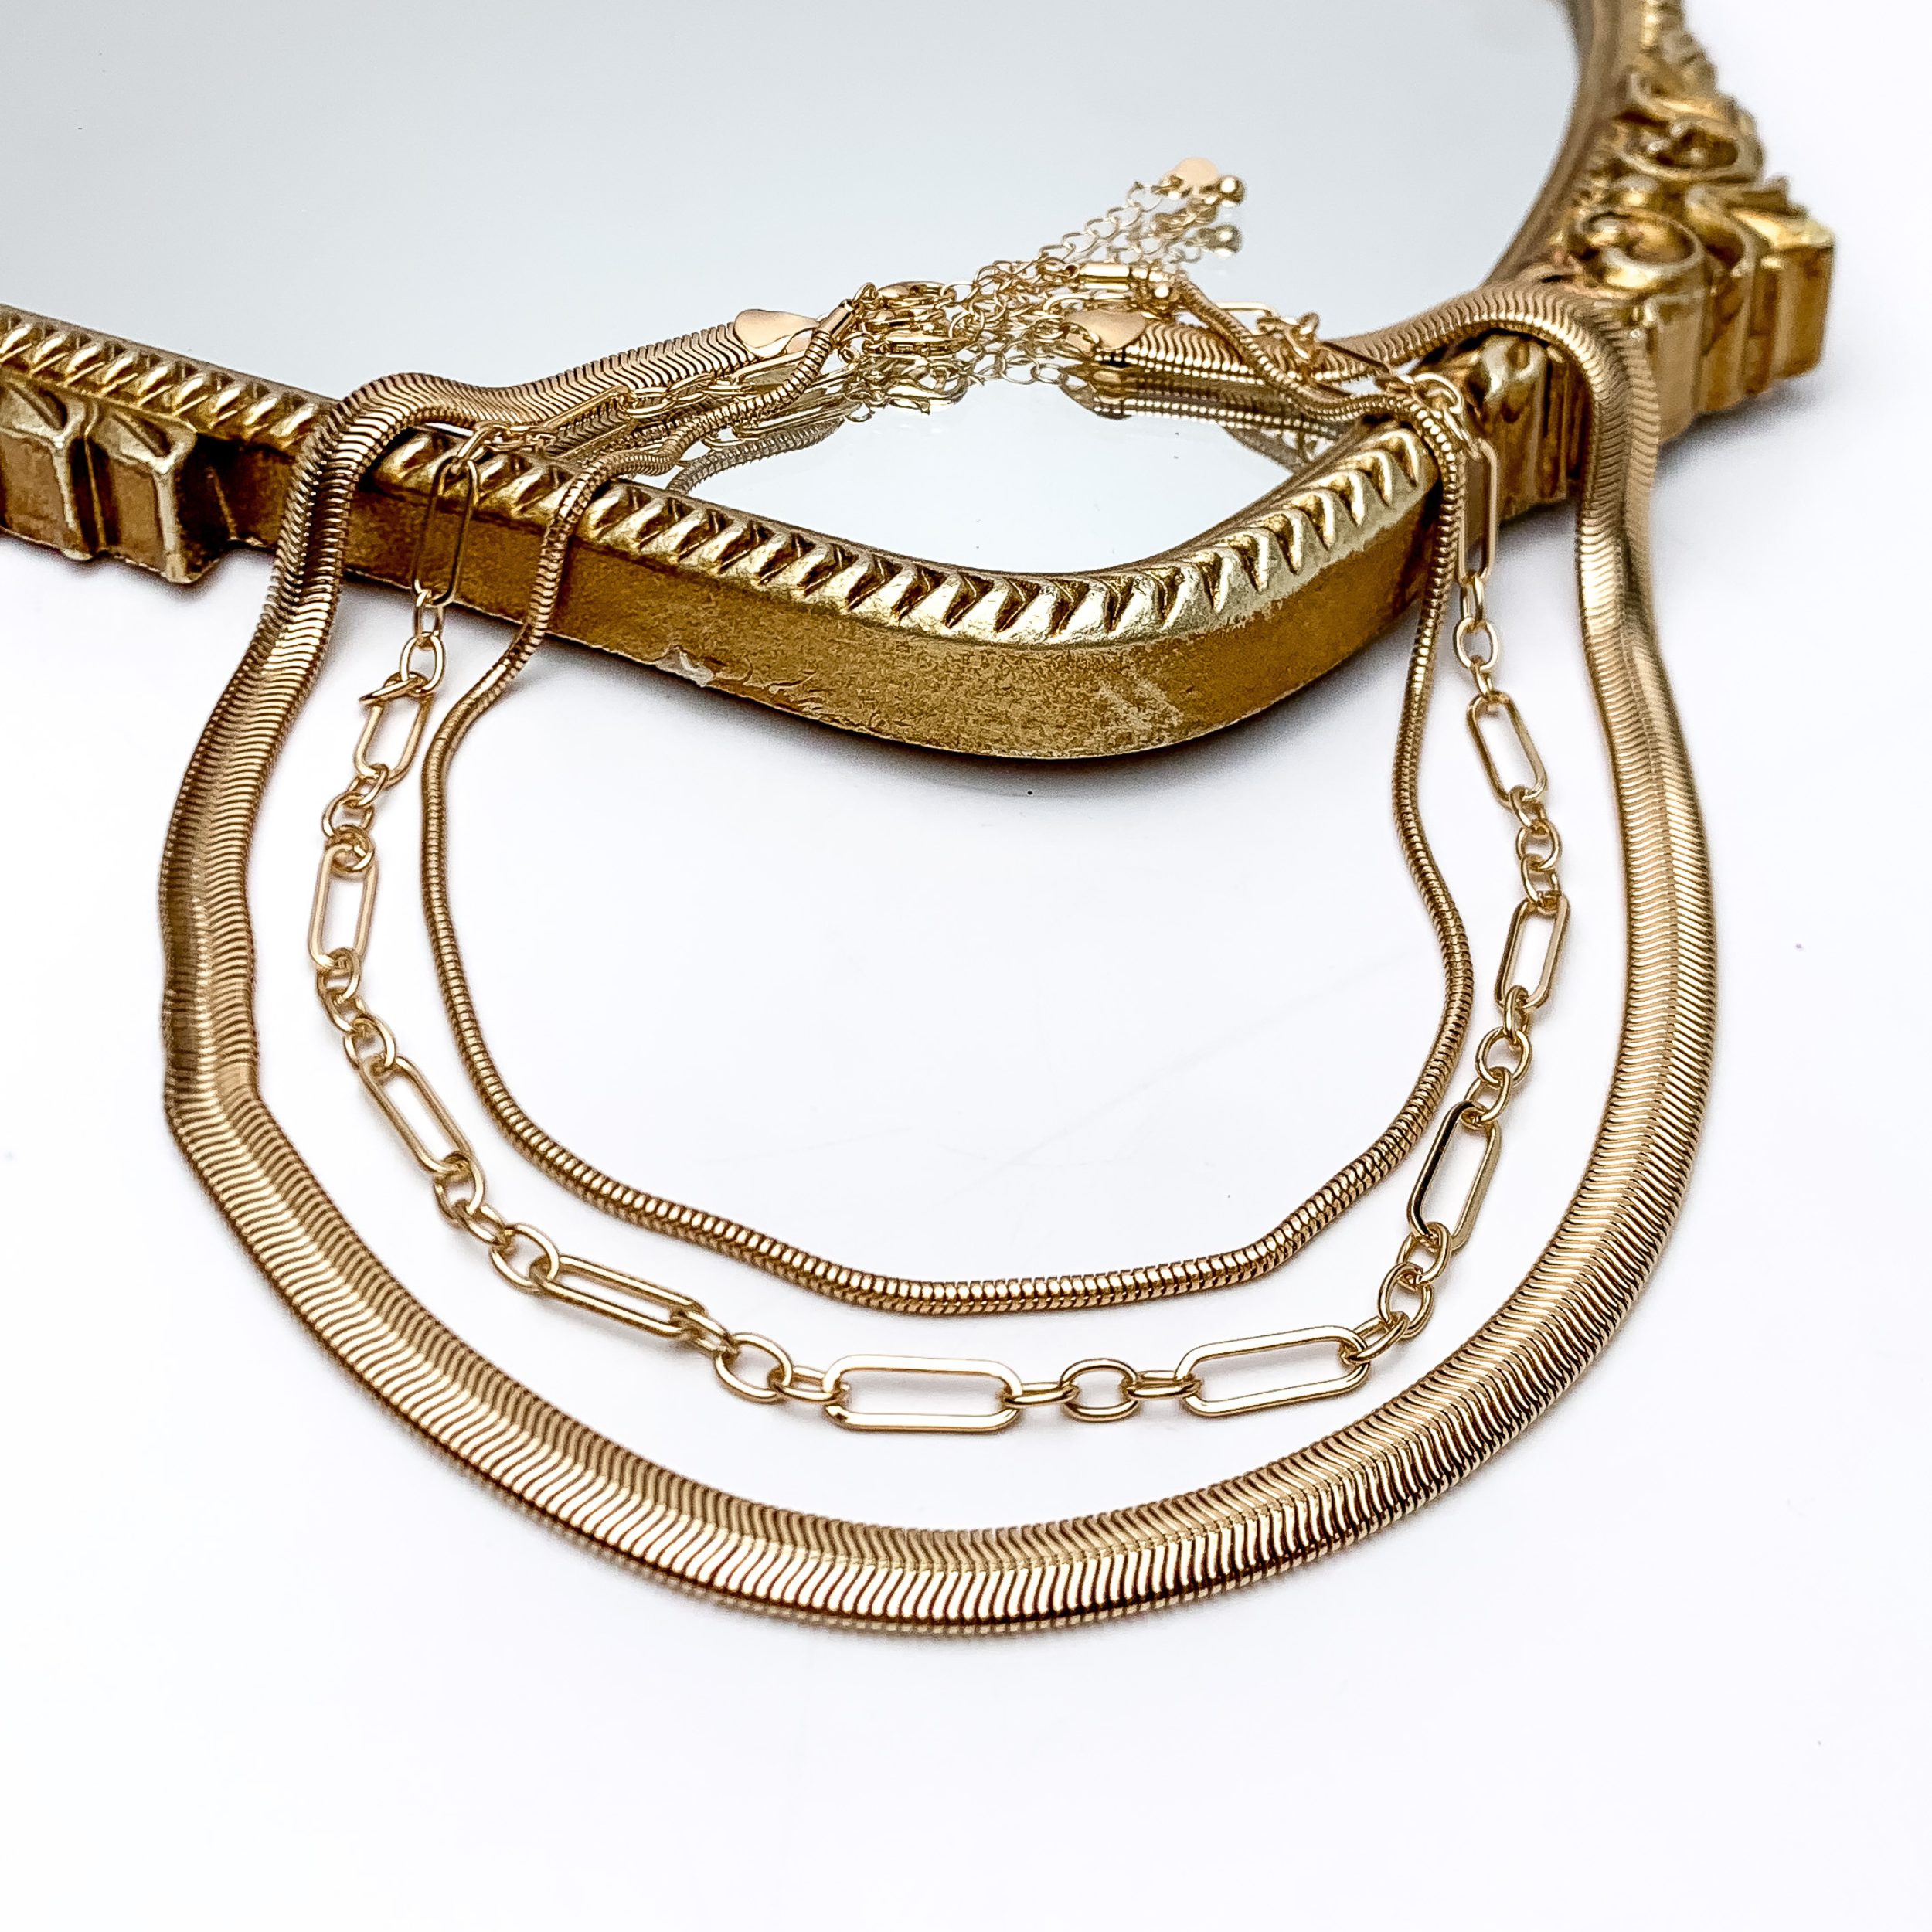 Island Metals Gold Tone Triple Strand Necklace. Pictured on a white background with part of the necklace on a gold framed mirror.